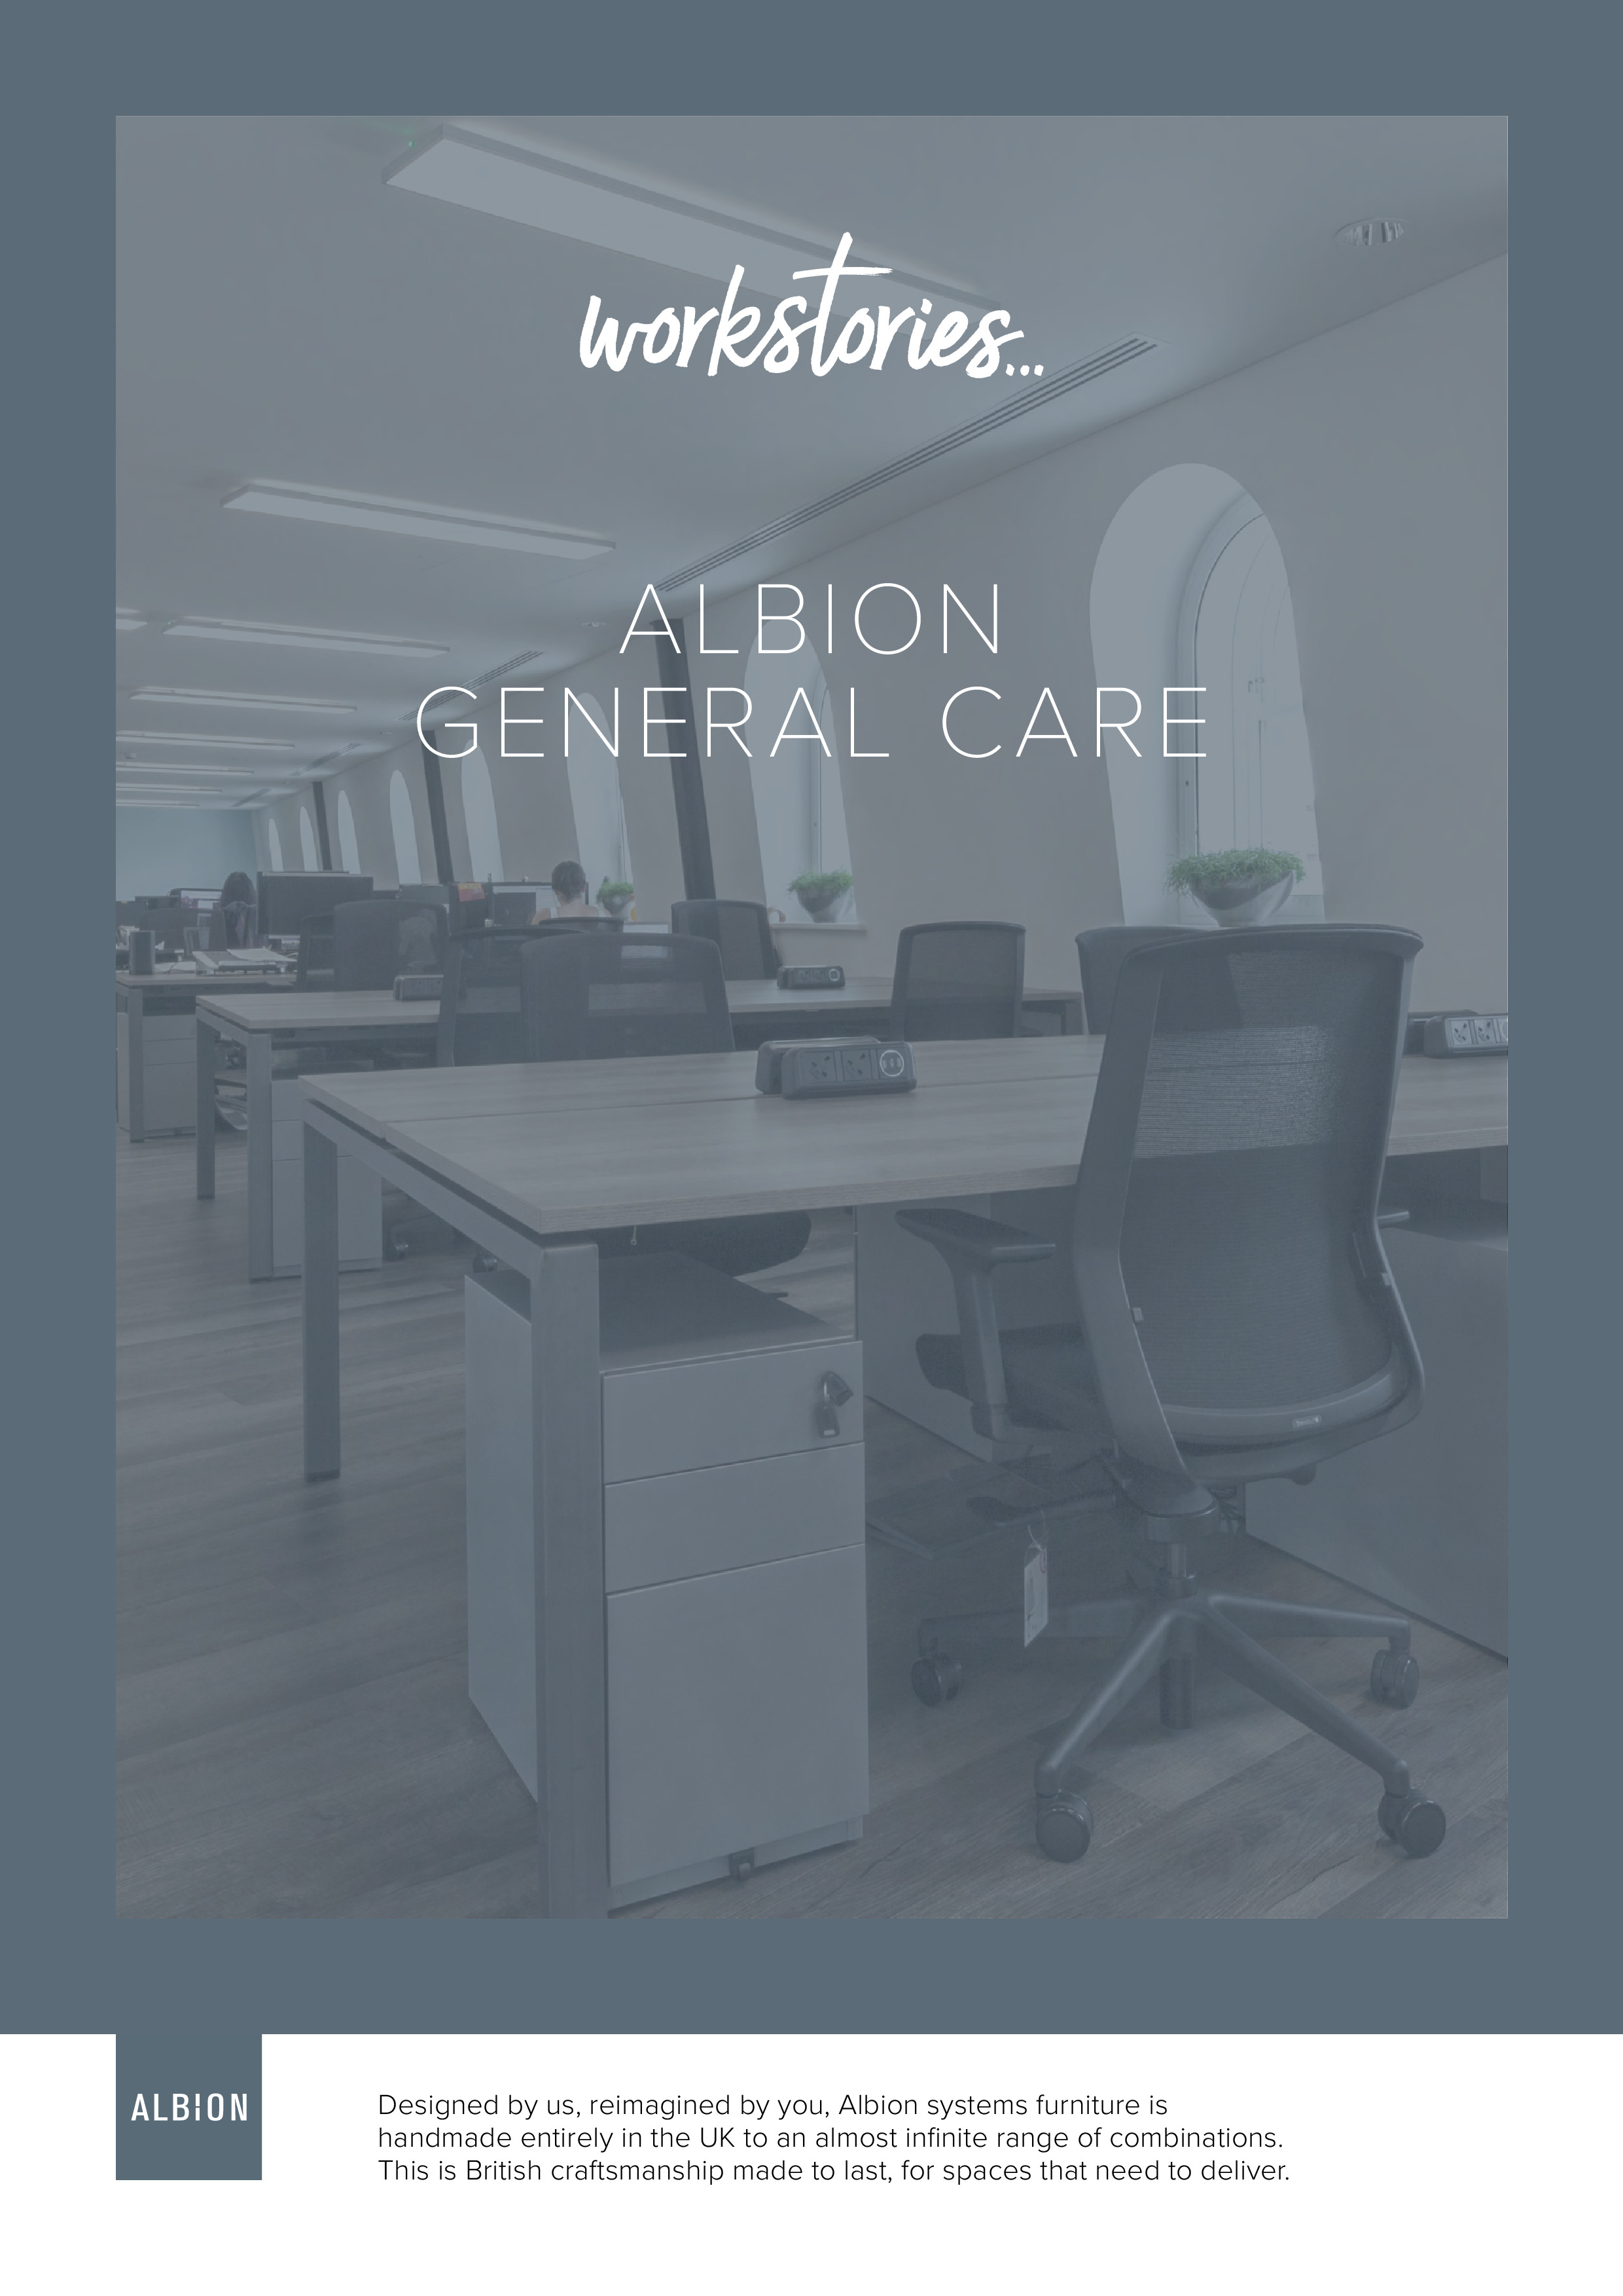 Workstories - General Care - Albion